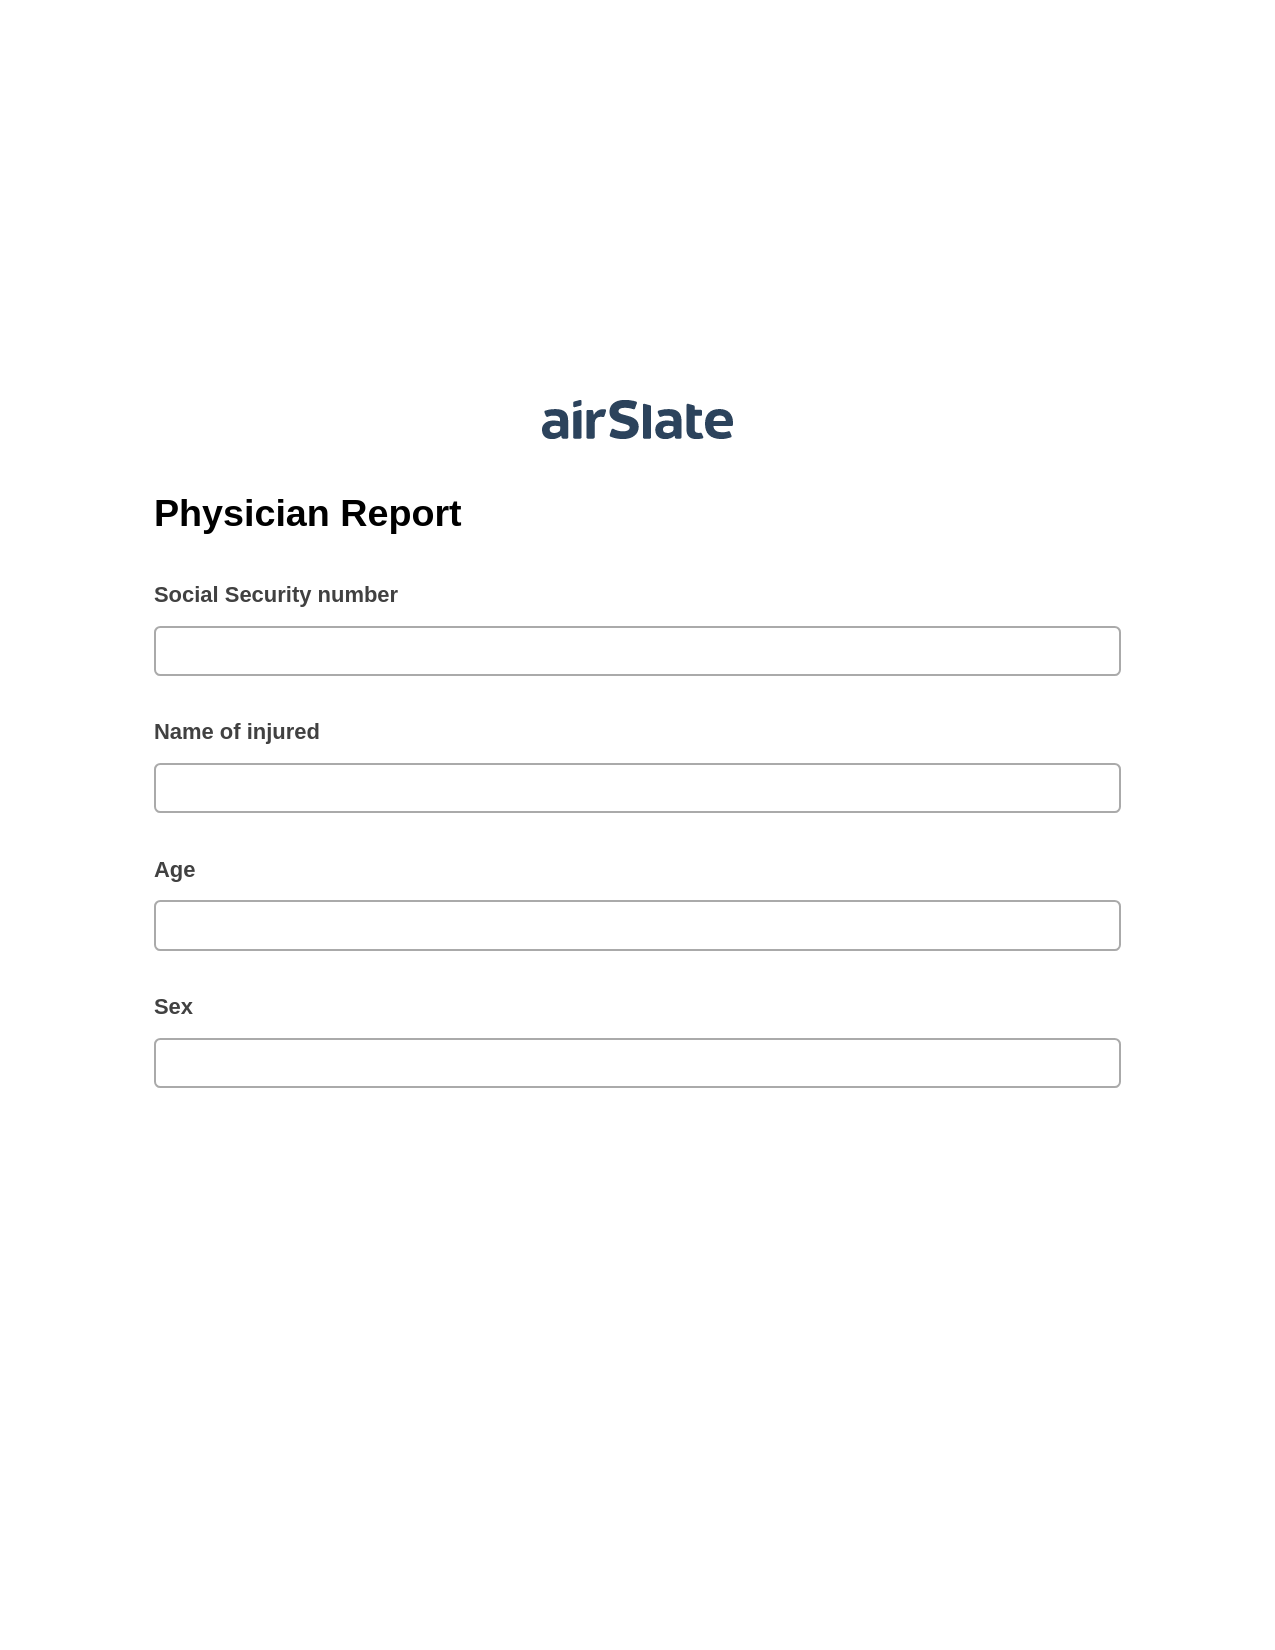 Multirole Physician Report Pre-fill from CSV File Bot, Lock the Slate Bot, Archive to Box Bot